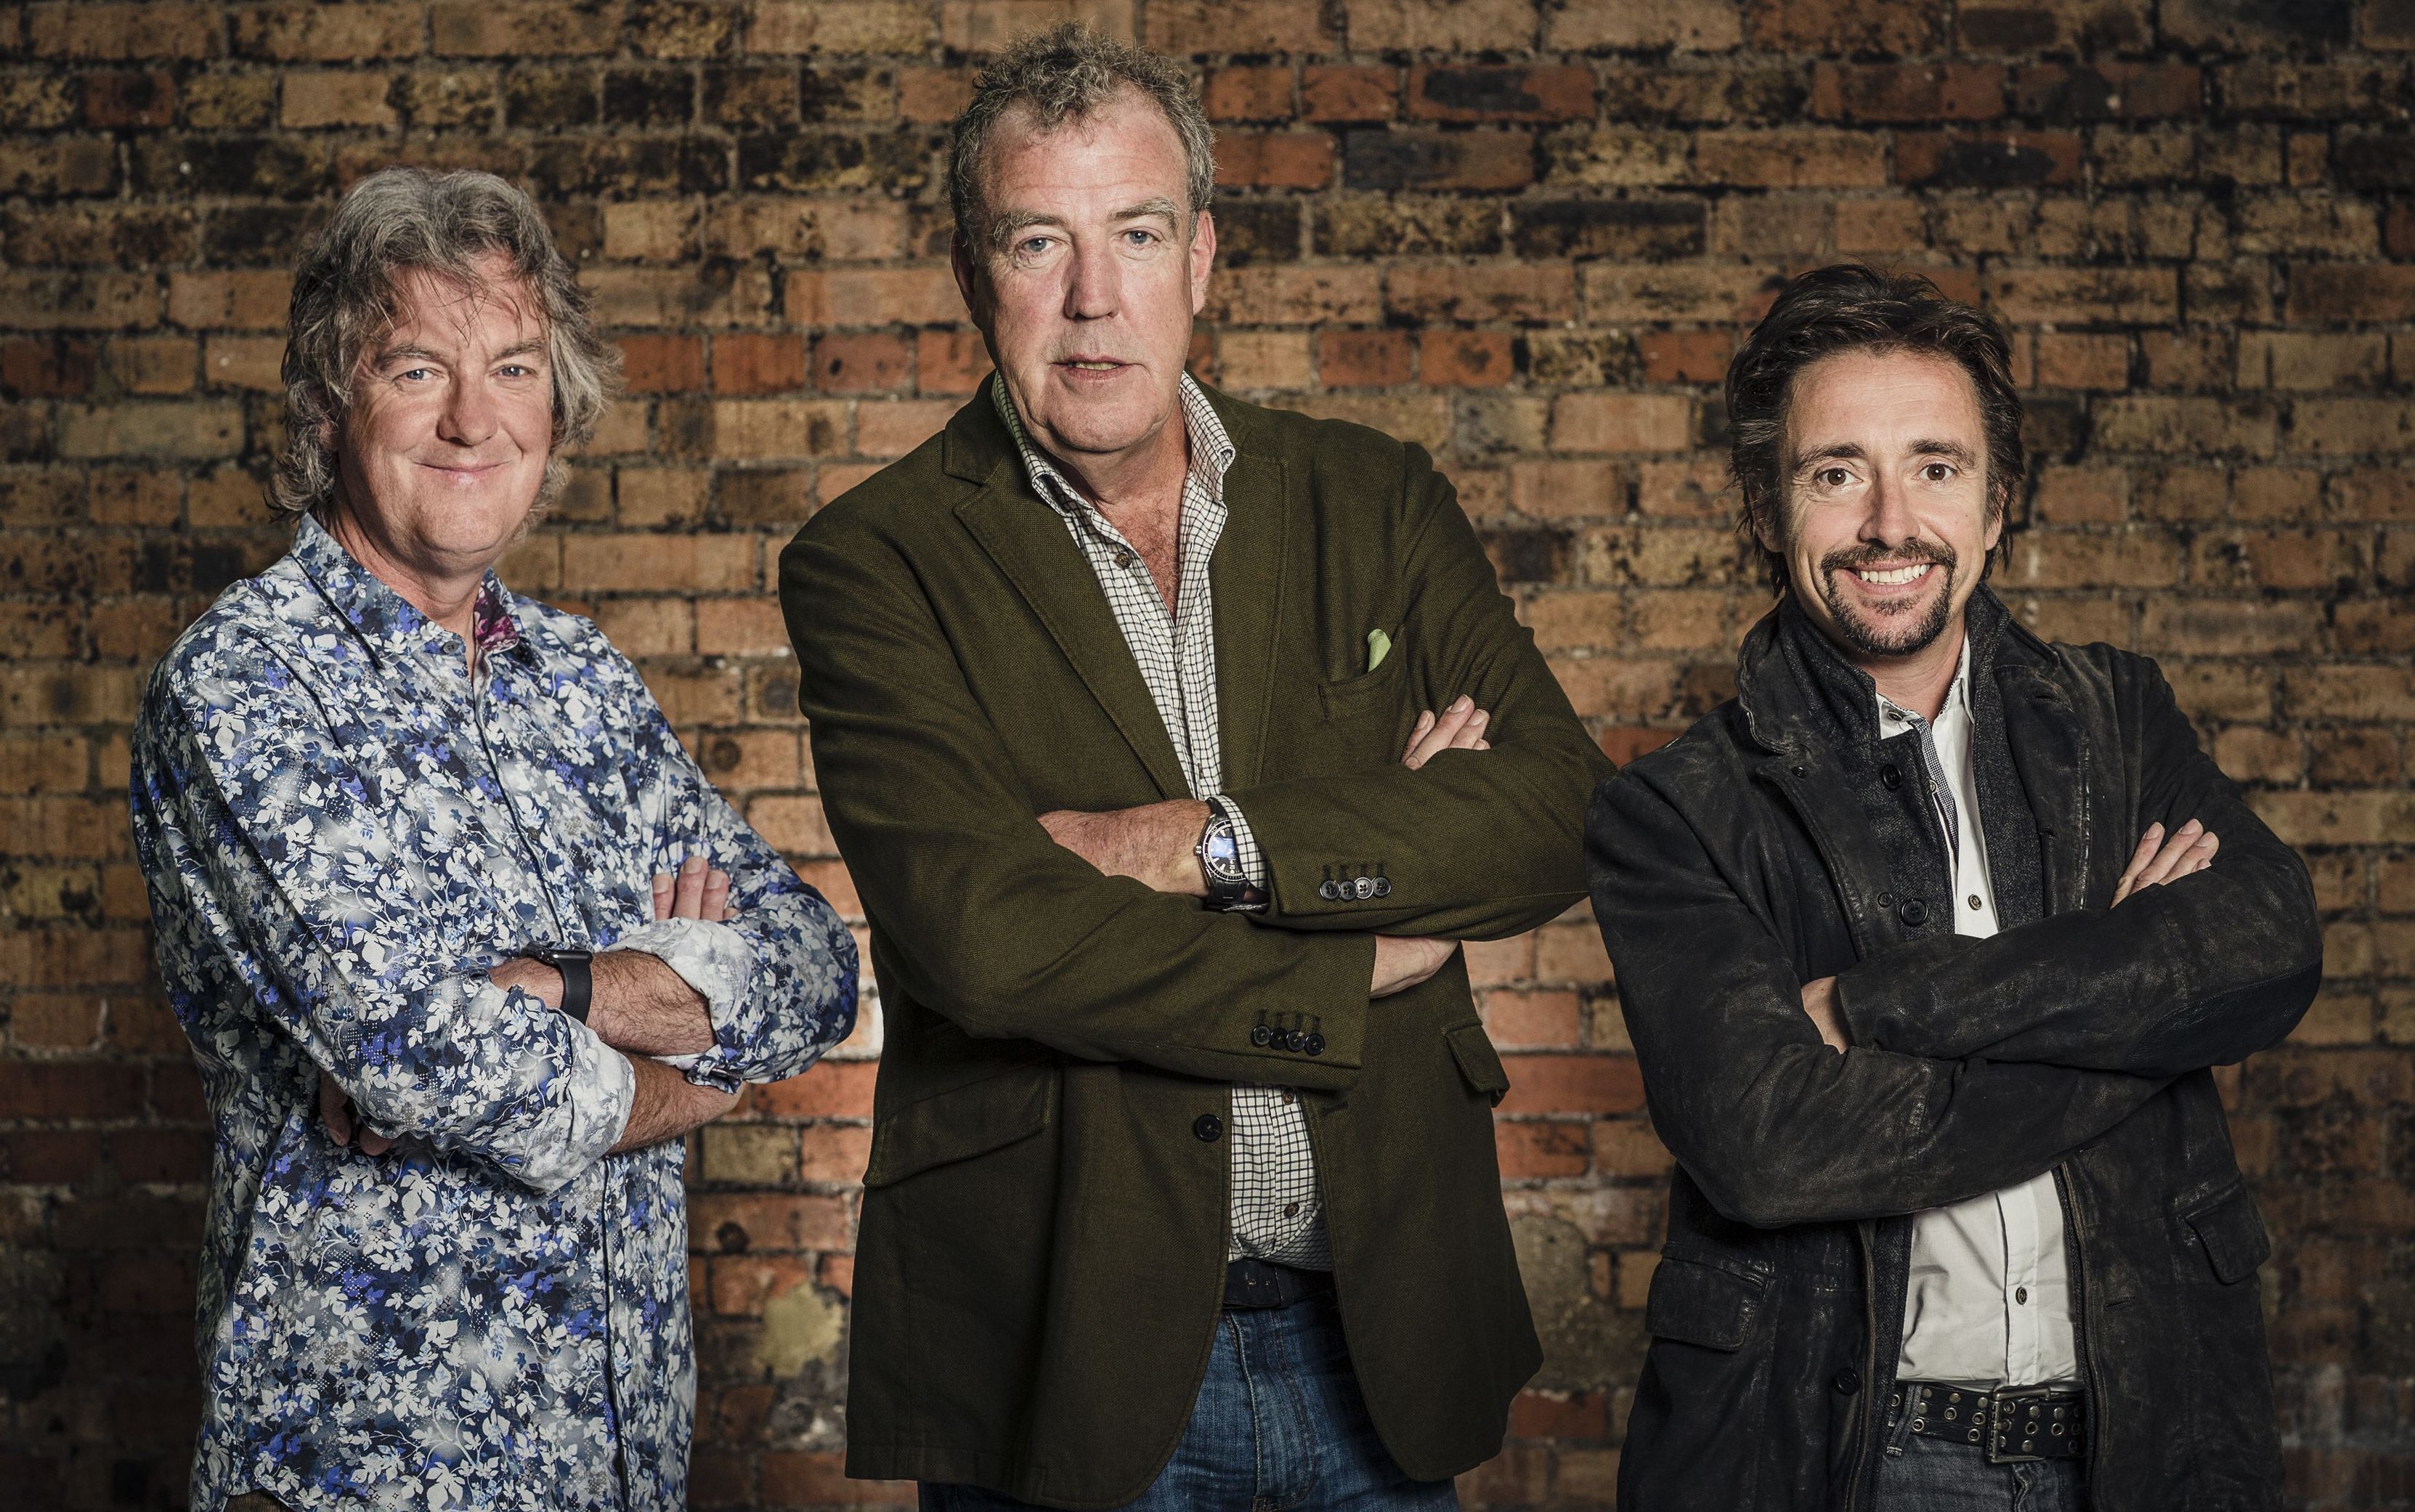 James May, Jeremy Clarkson and Richard Hammond during filming of The Grand Tour.